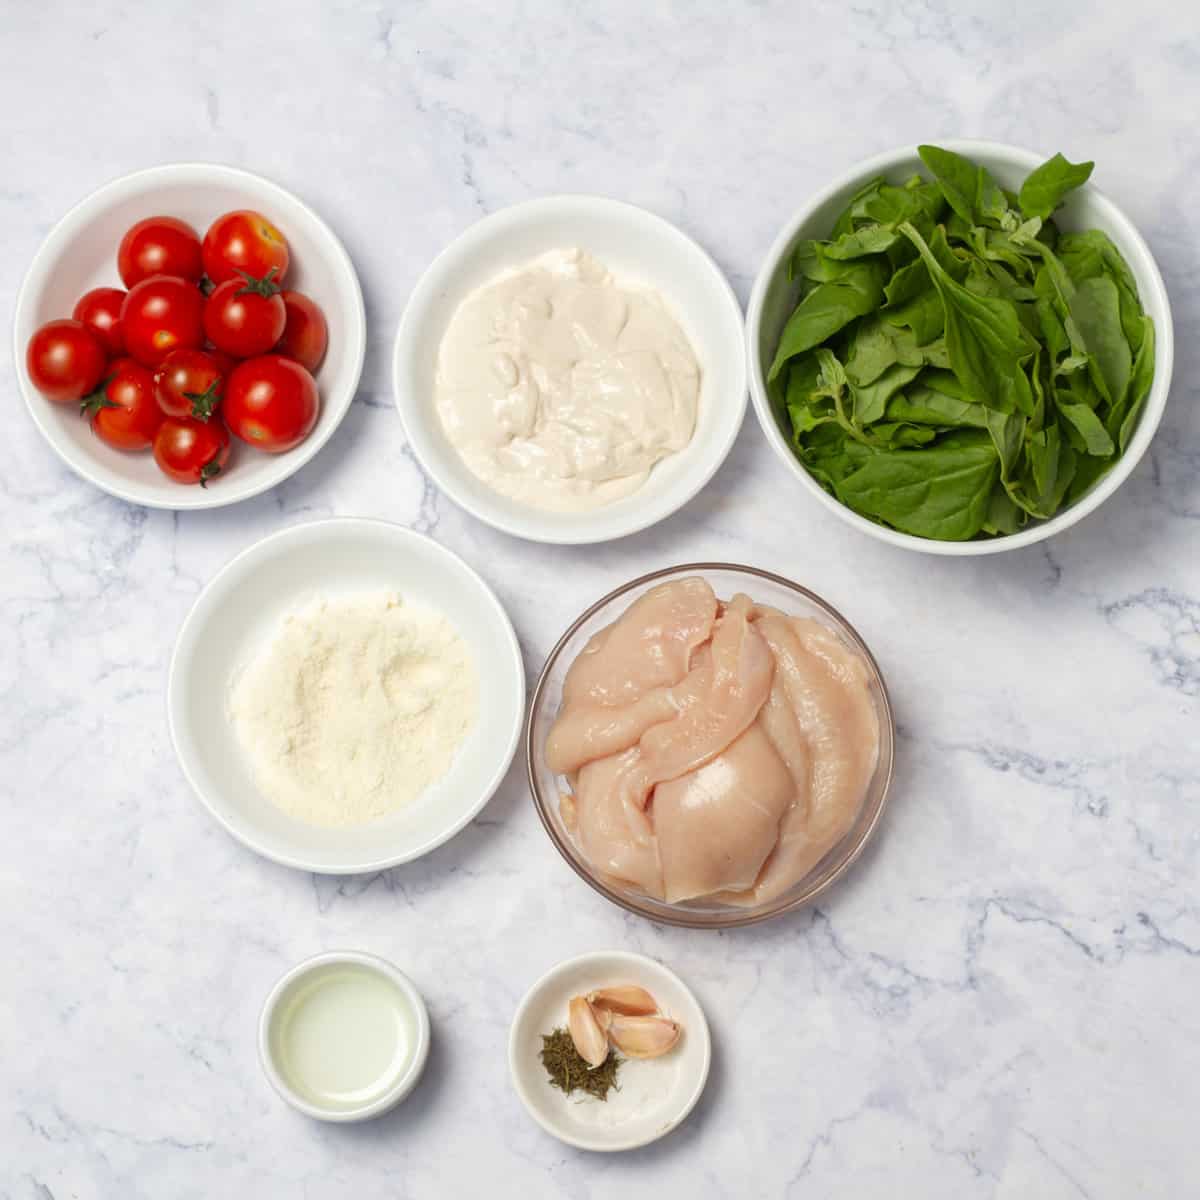 Tuscan chicken ingredients of chicken breast, spinach, cherry tomatoes, fat-free Greek yogurt, parmesan cheese, Herbs de Provence, garlic, and salt in separate dishes. 